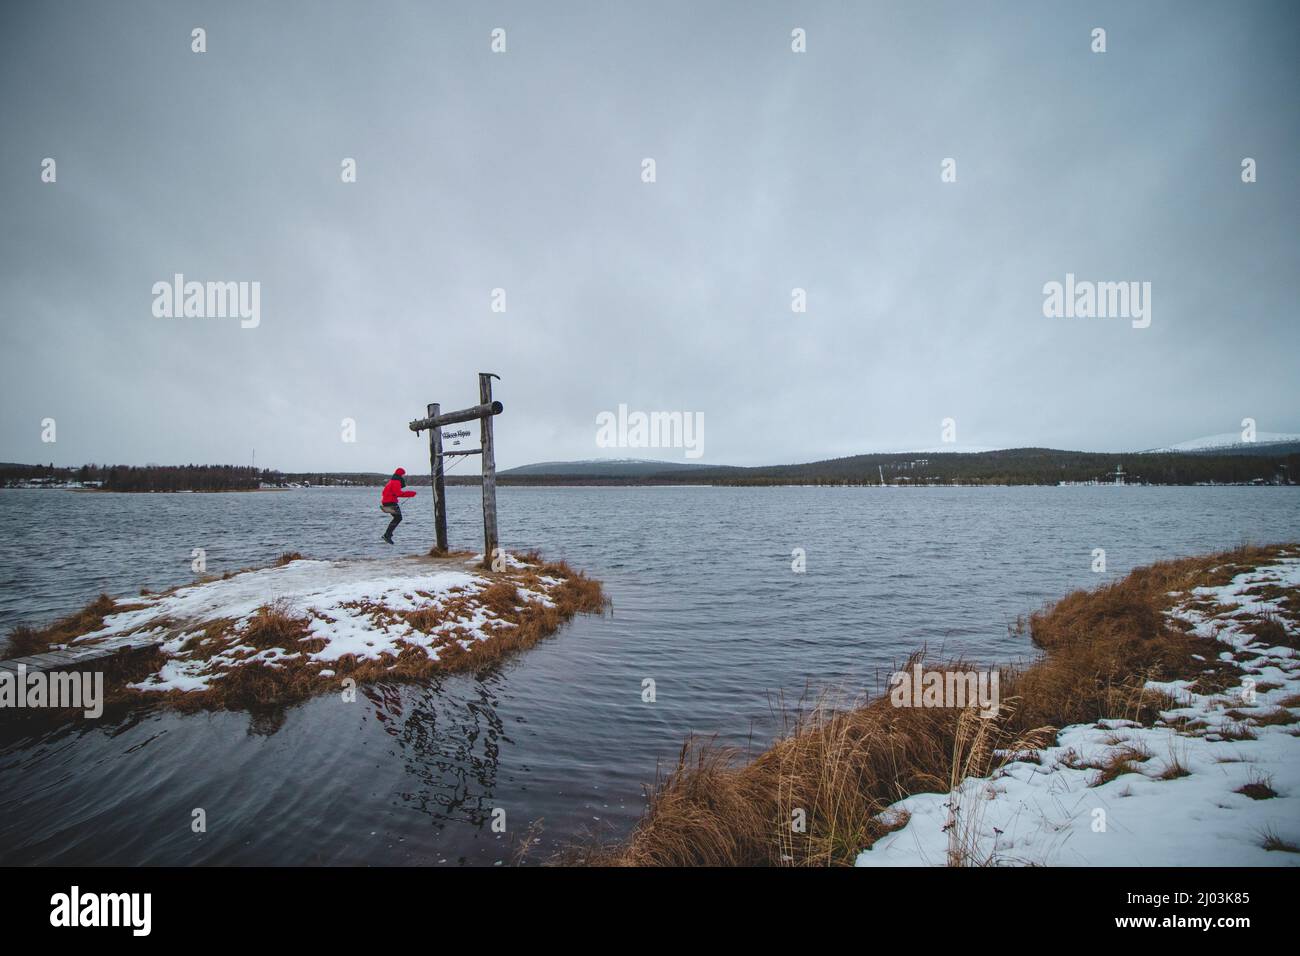 Woman in a red jacket enjoys a wooden swing in the town of Äkäslompolo in Lapland, Finland on a lake and the surrounding snowy mountains. The joy of a Stock Photo